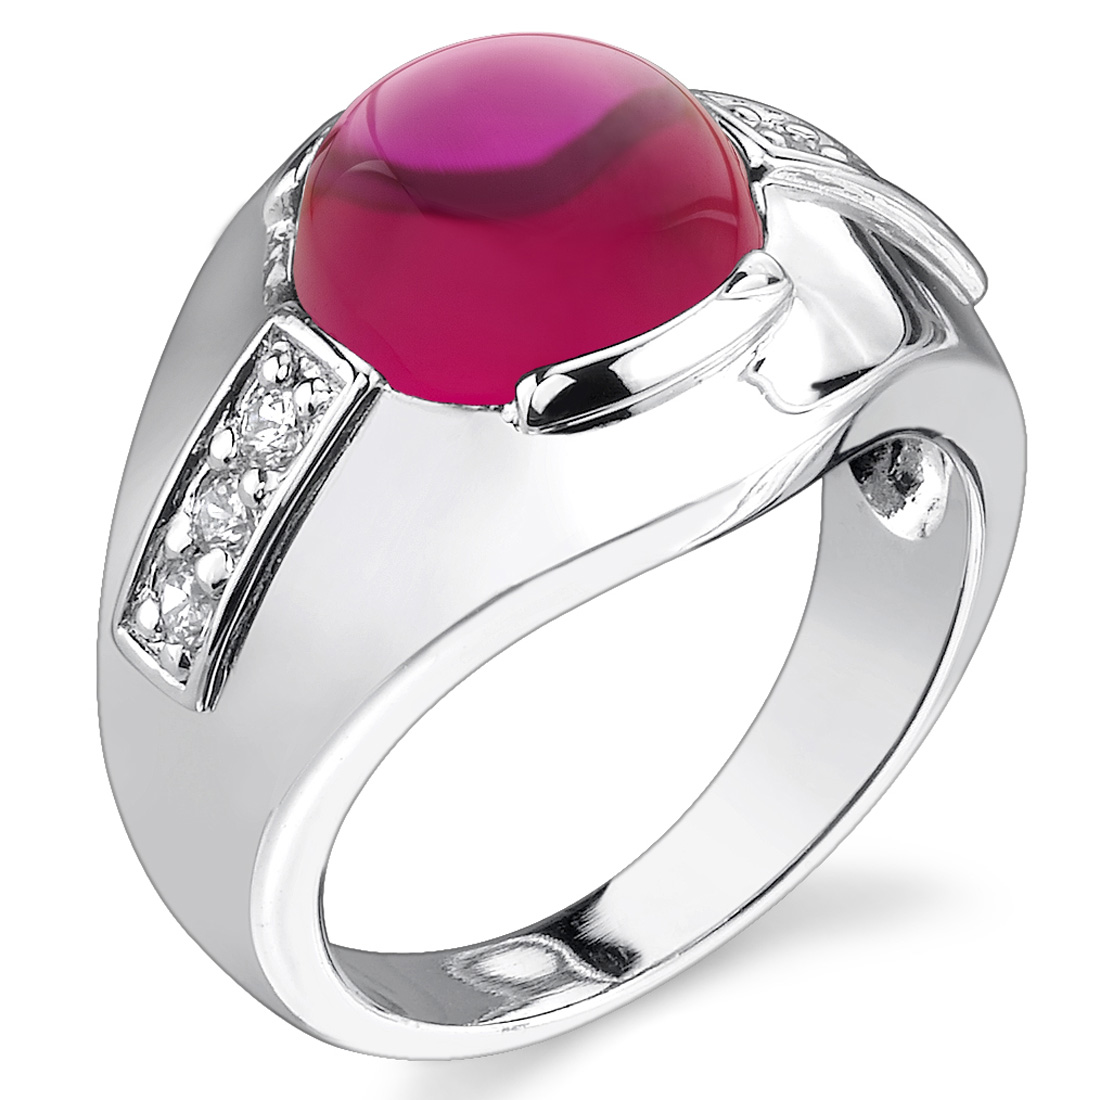 Mens 7.00 cts Round Cabochon Ruby Ring in Sterling Silver Sizes 8 to 13